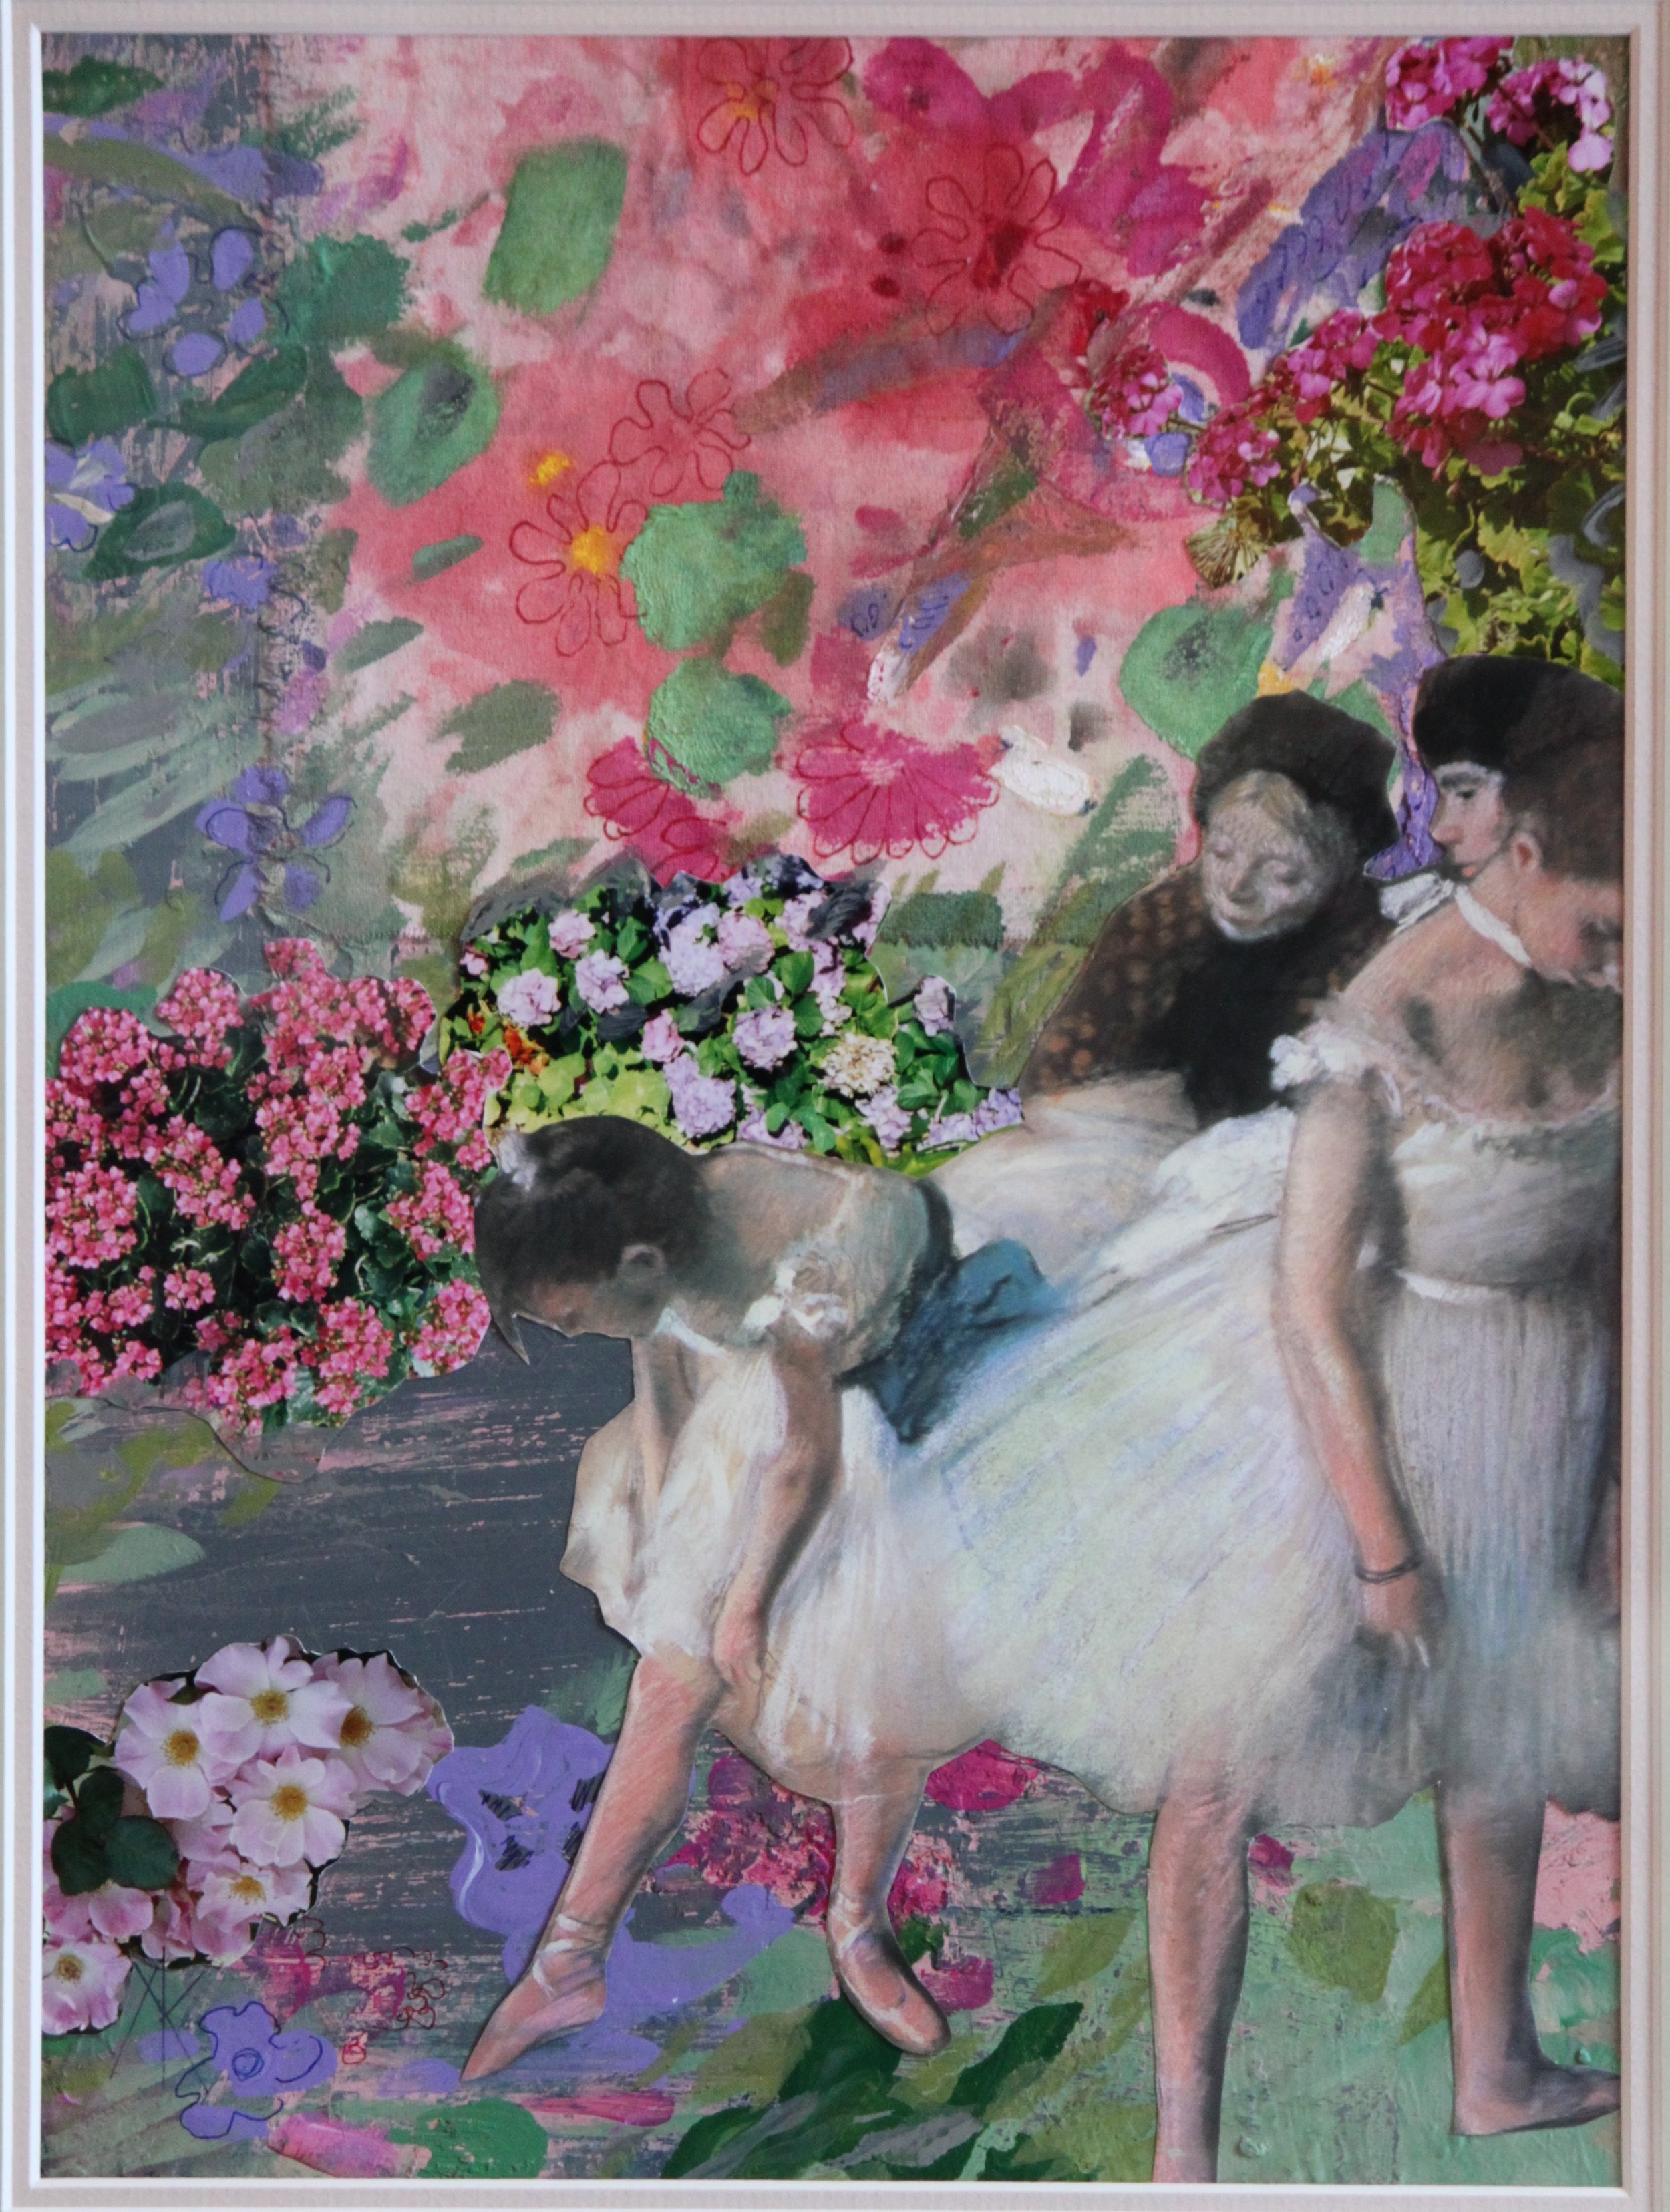  TITLE:  Degas’s garden 3  MEDIUM: Acrylic paint and collage on paper DIMENSIONS: H59 x W49cm  FRAMED 